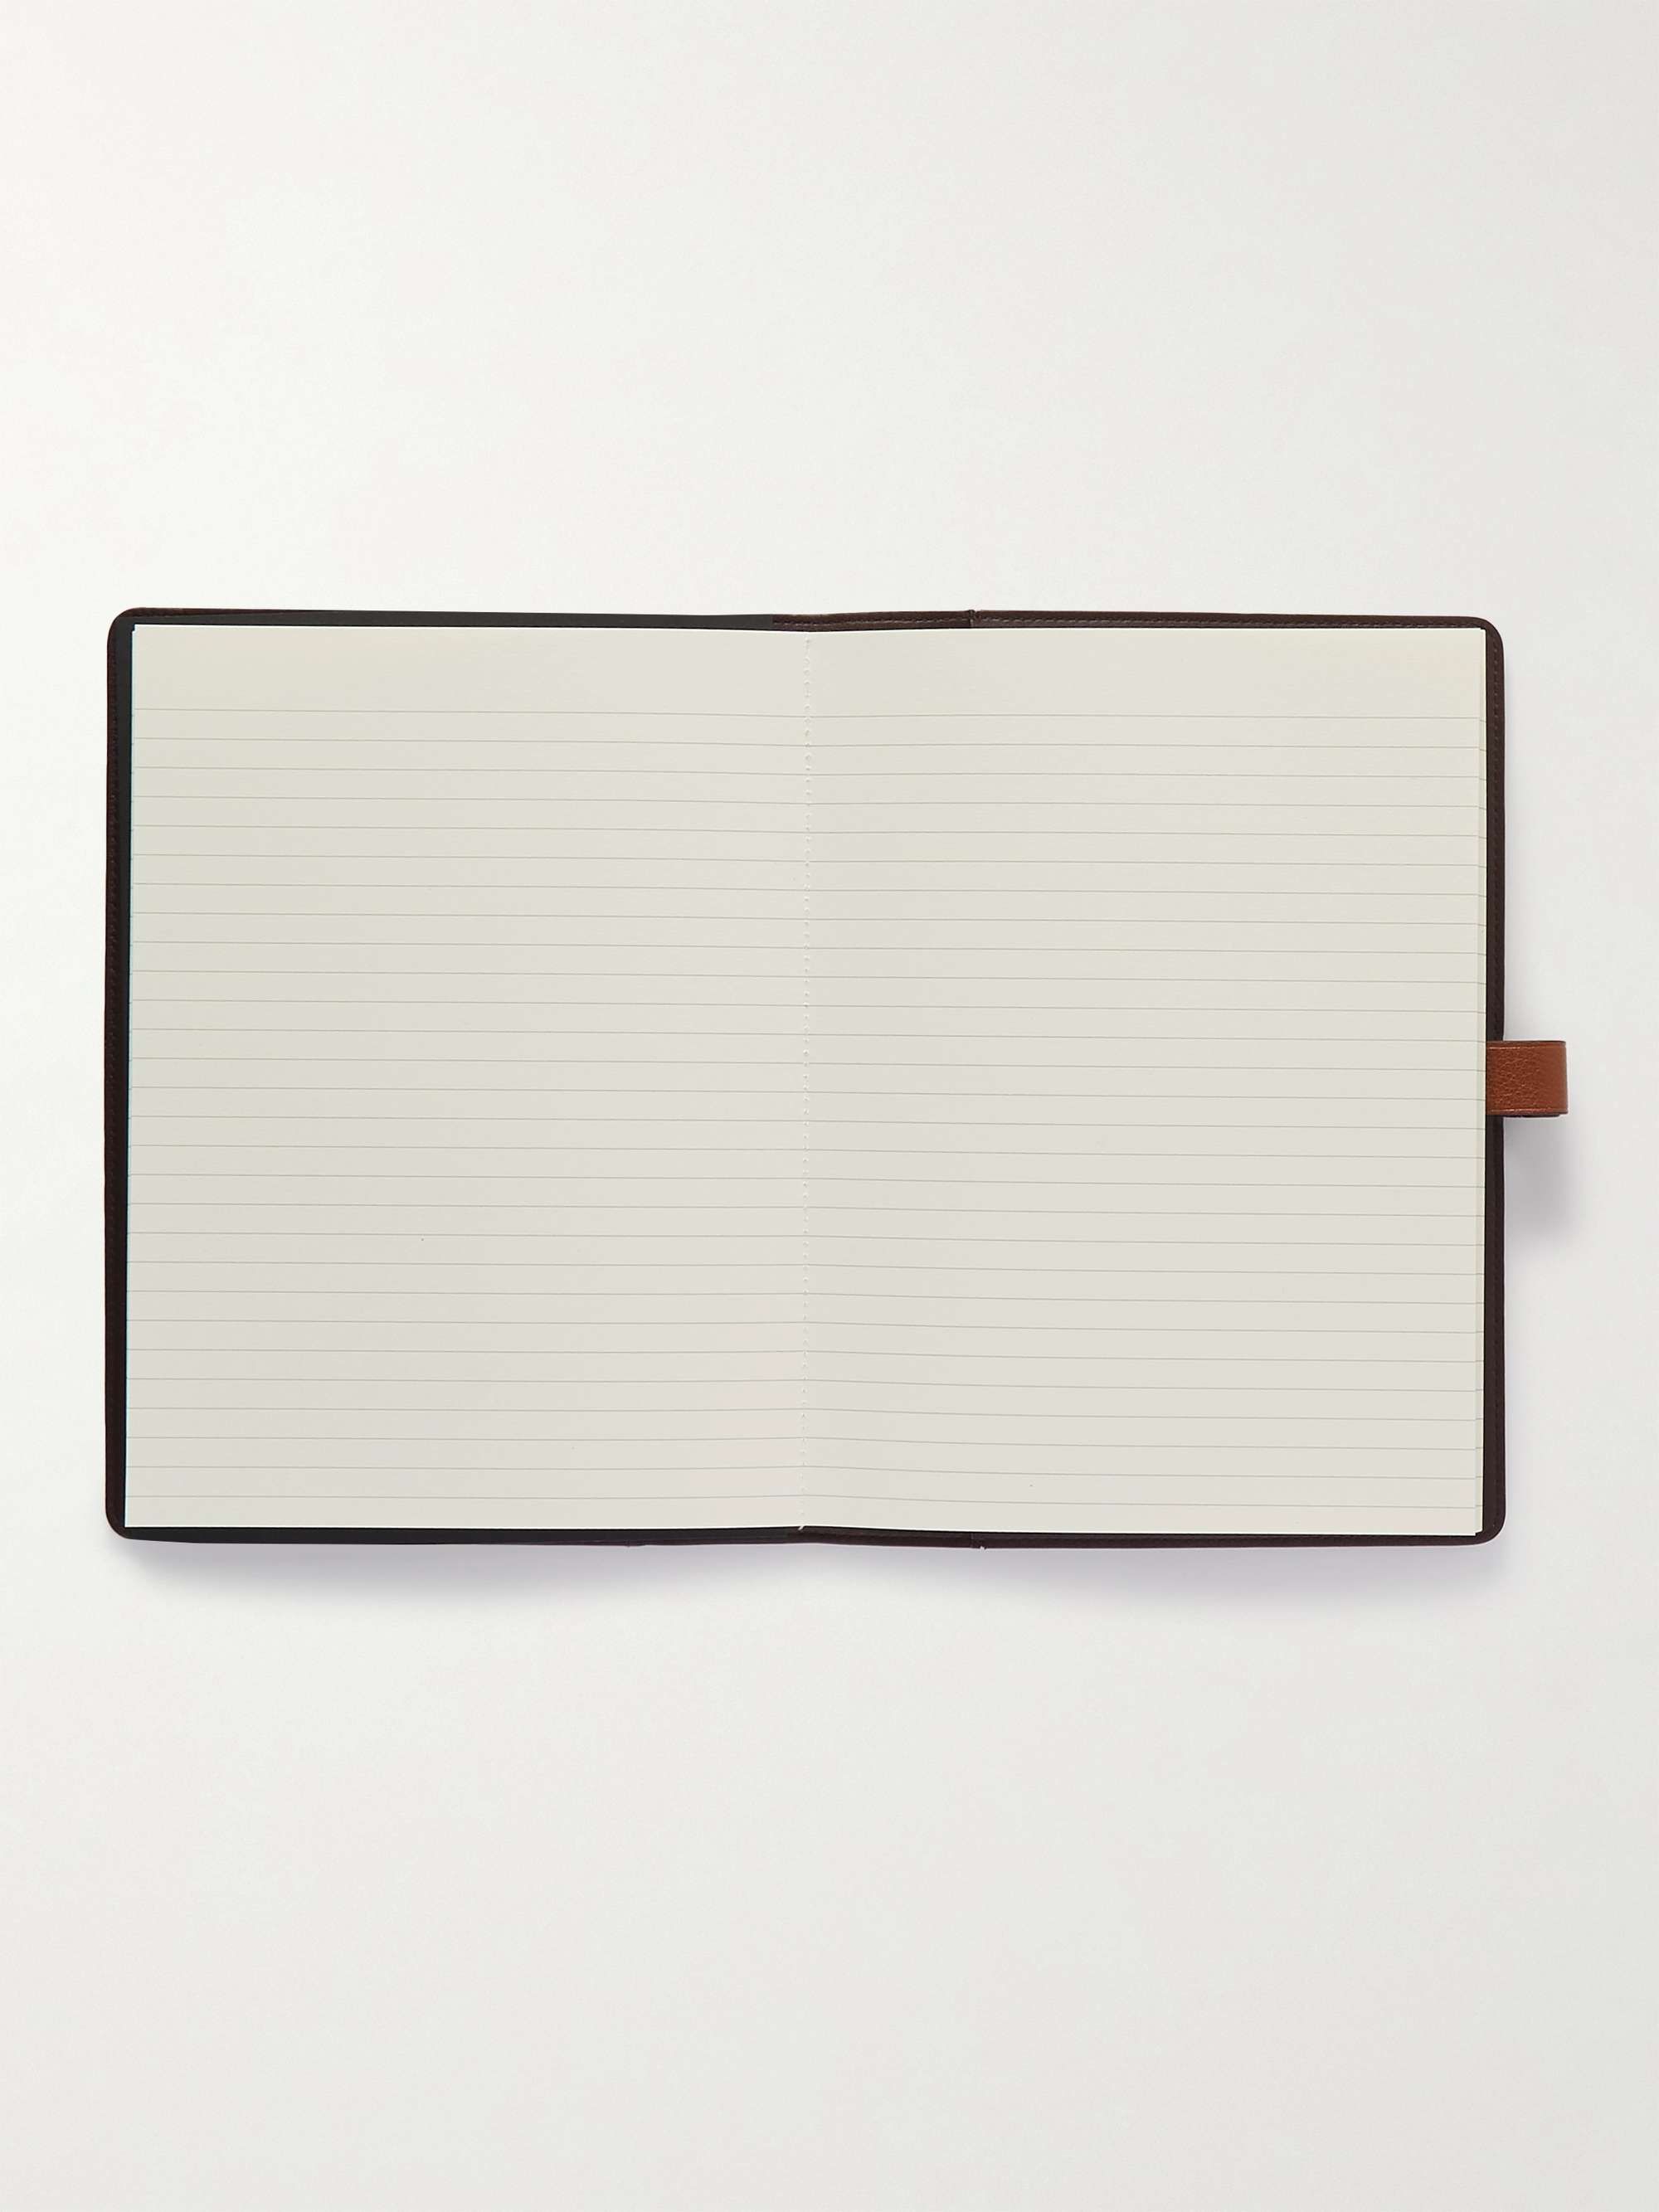 MÉTIER Leather-Trimmed Printed Canvas Notebook